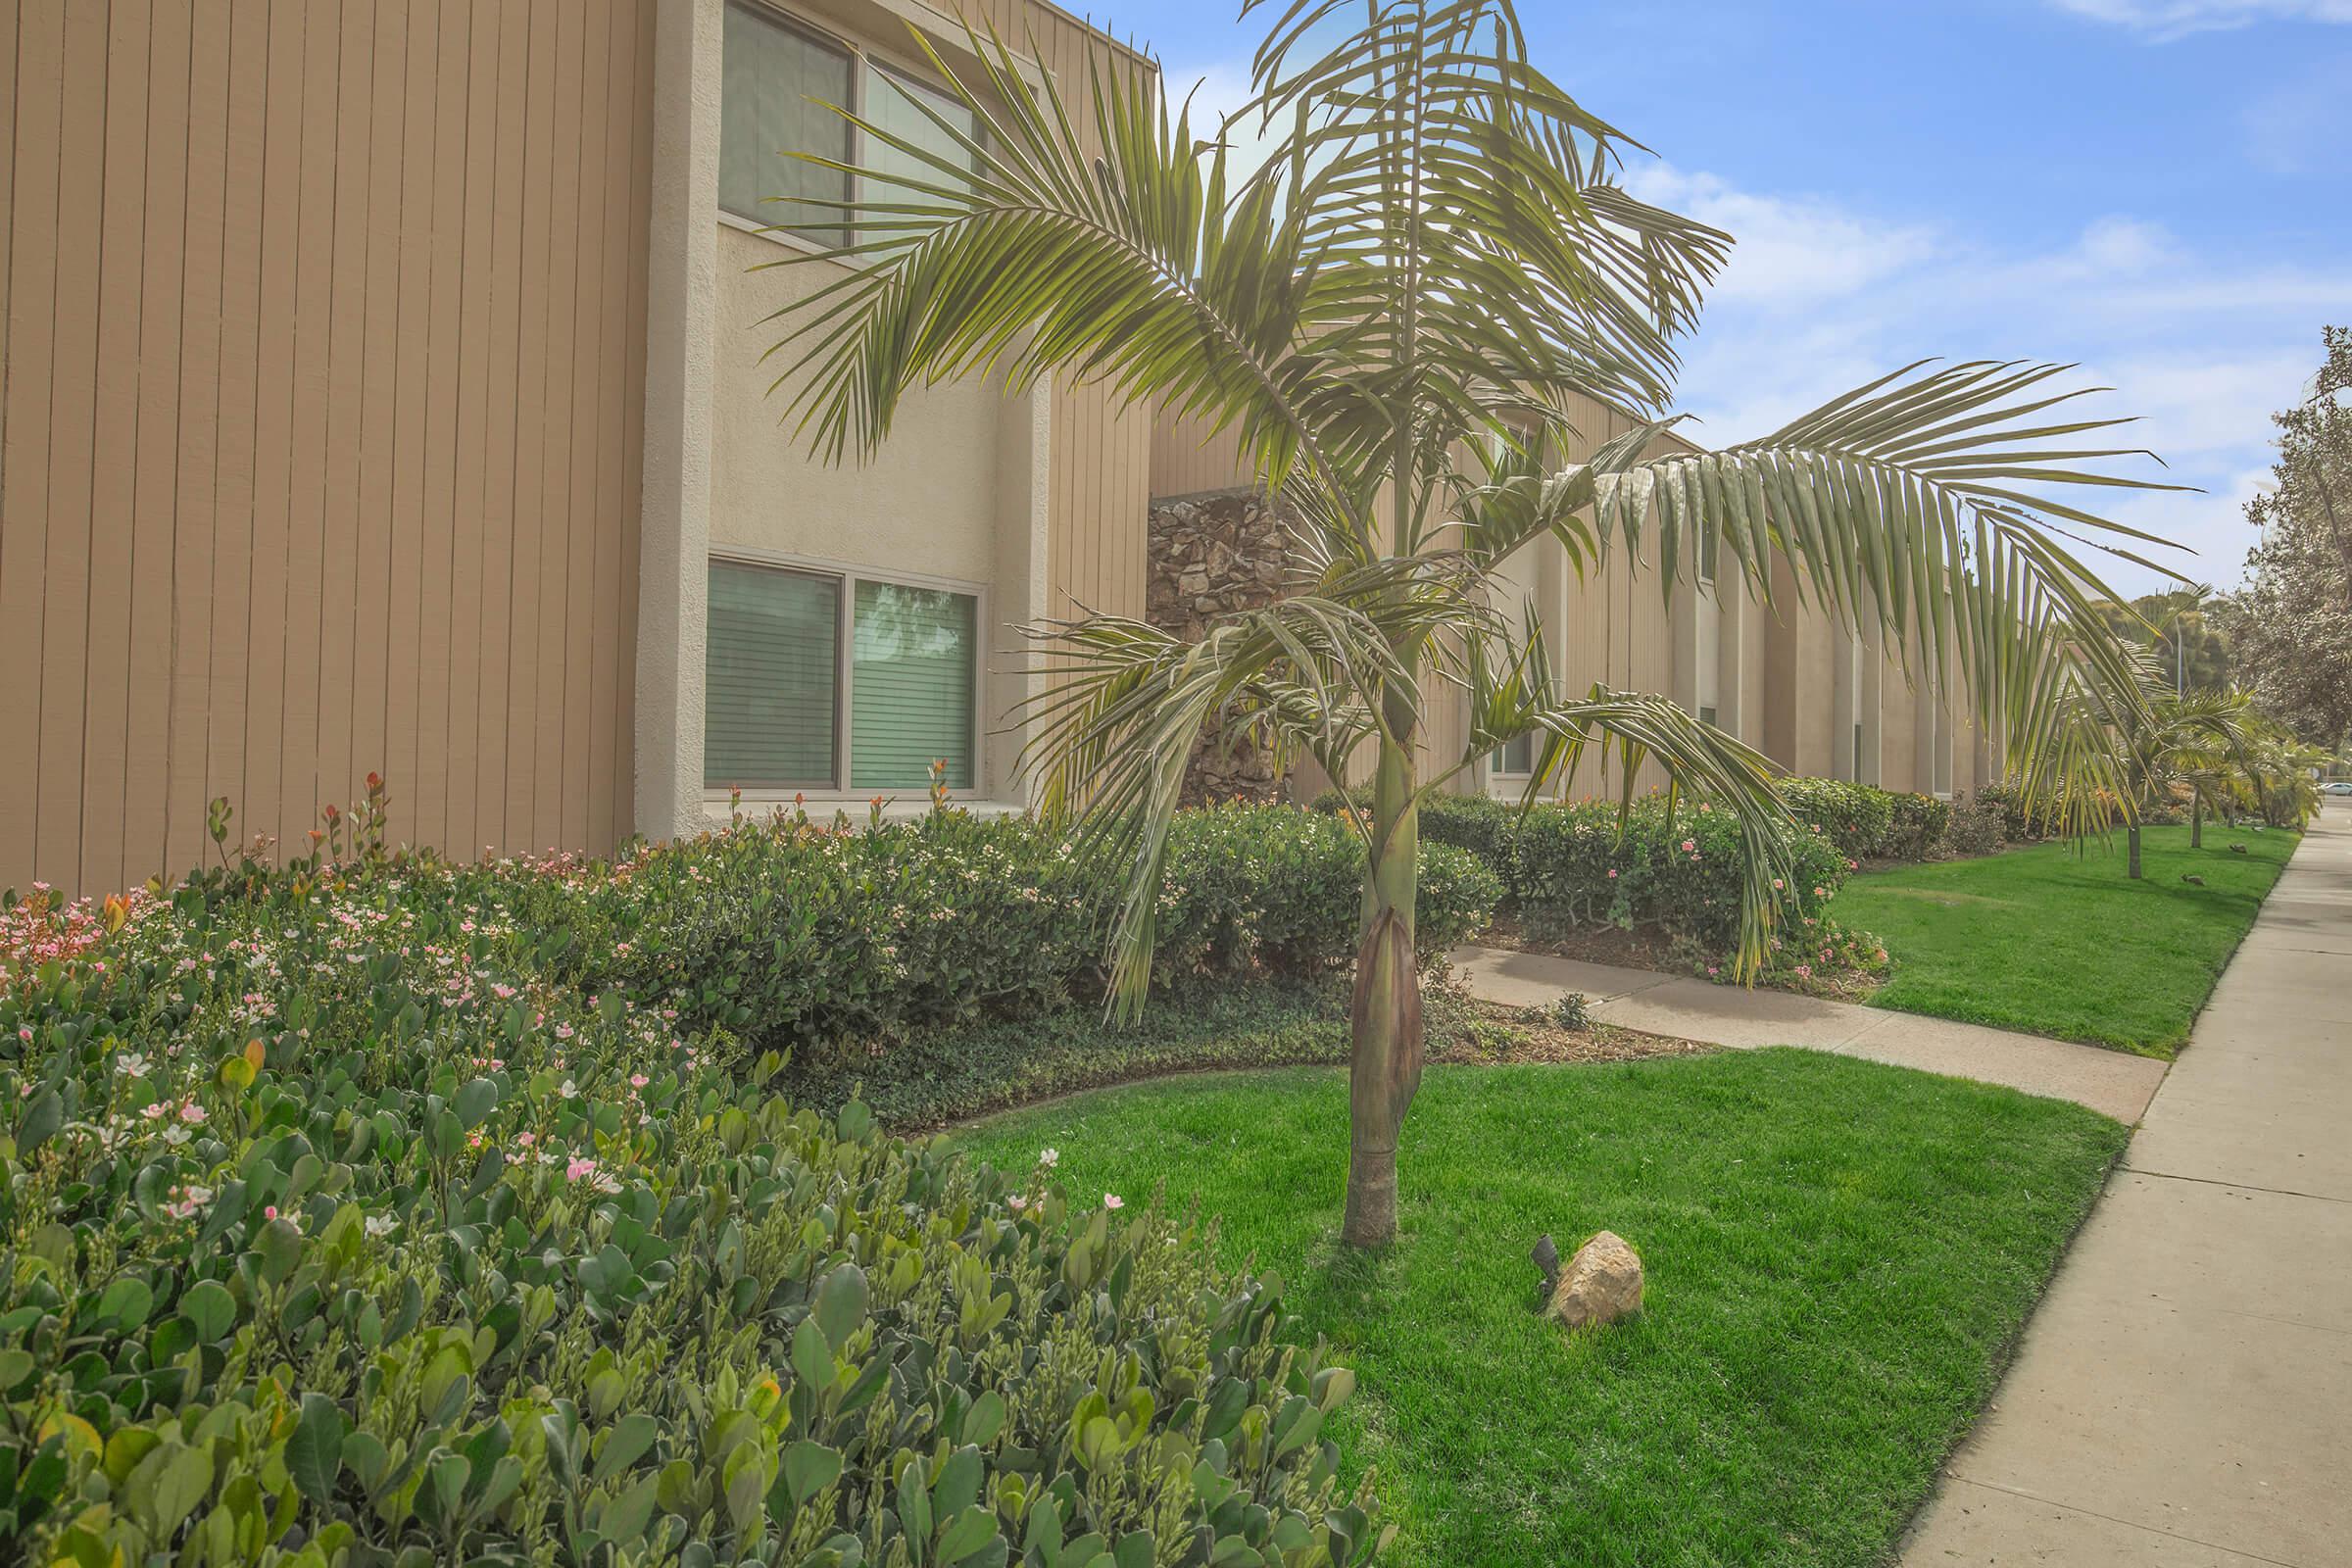 a tree in front of a palm tree on a sidewalk